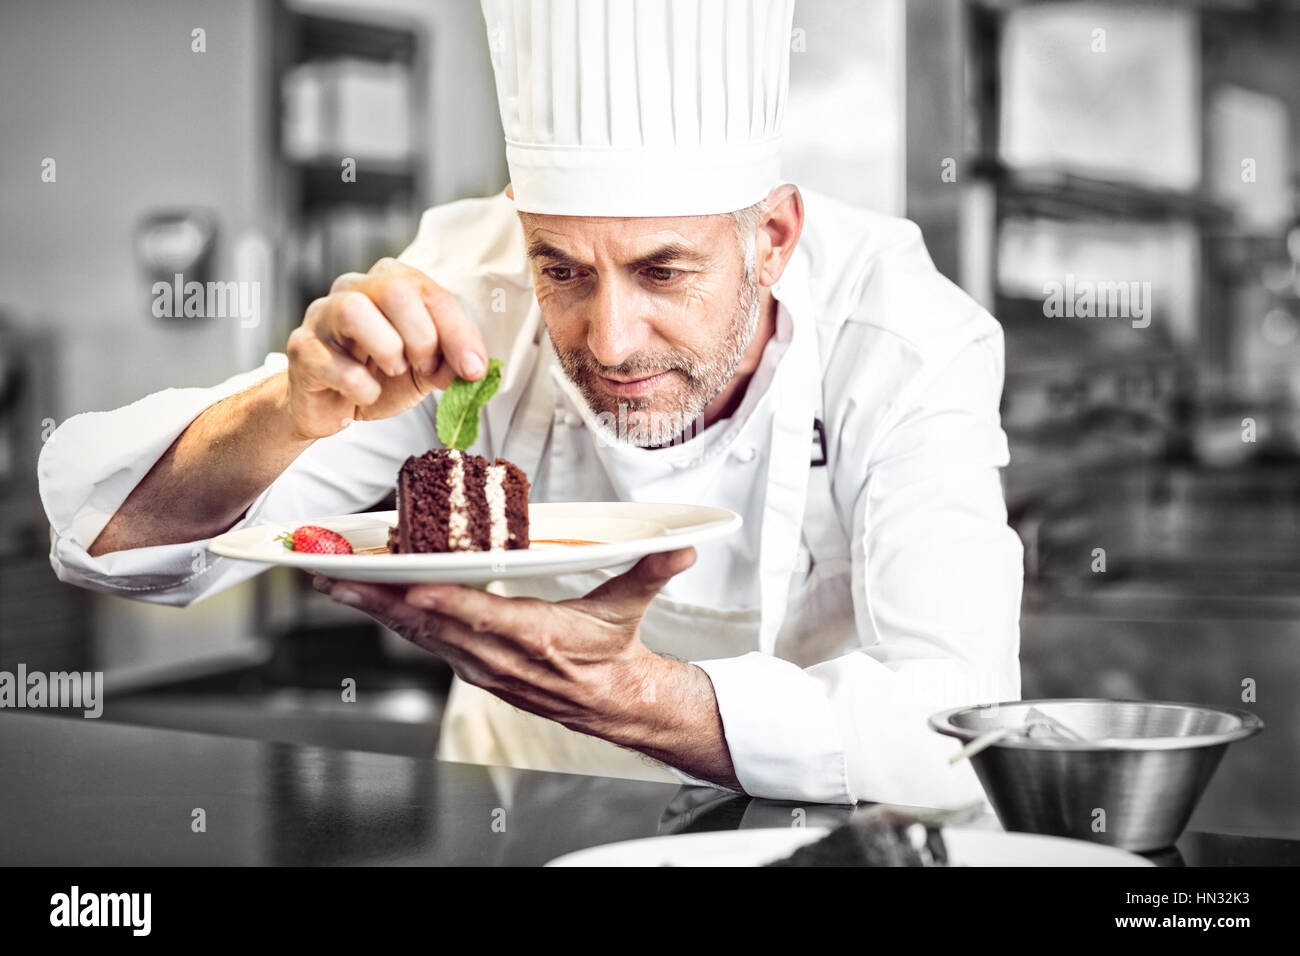 Closeup of a concentrated male pastry chef decorating dessert in the kitchen Stock Photo